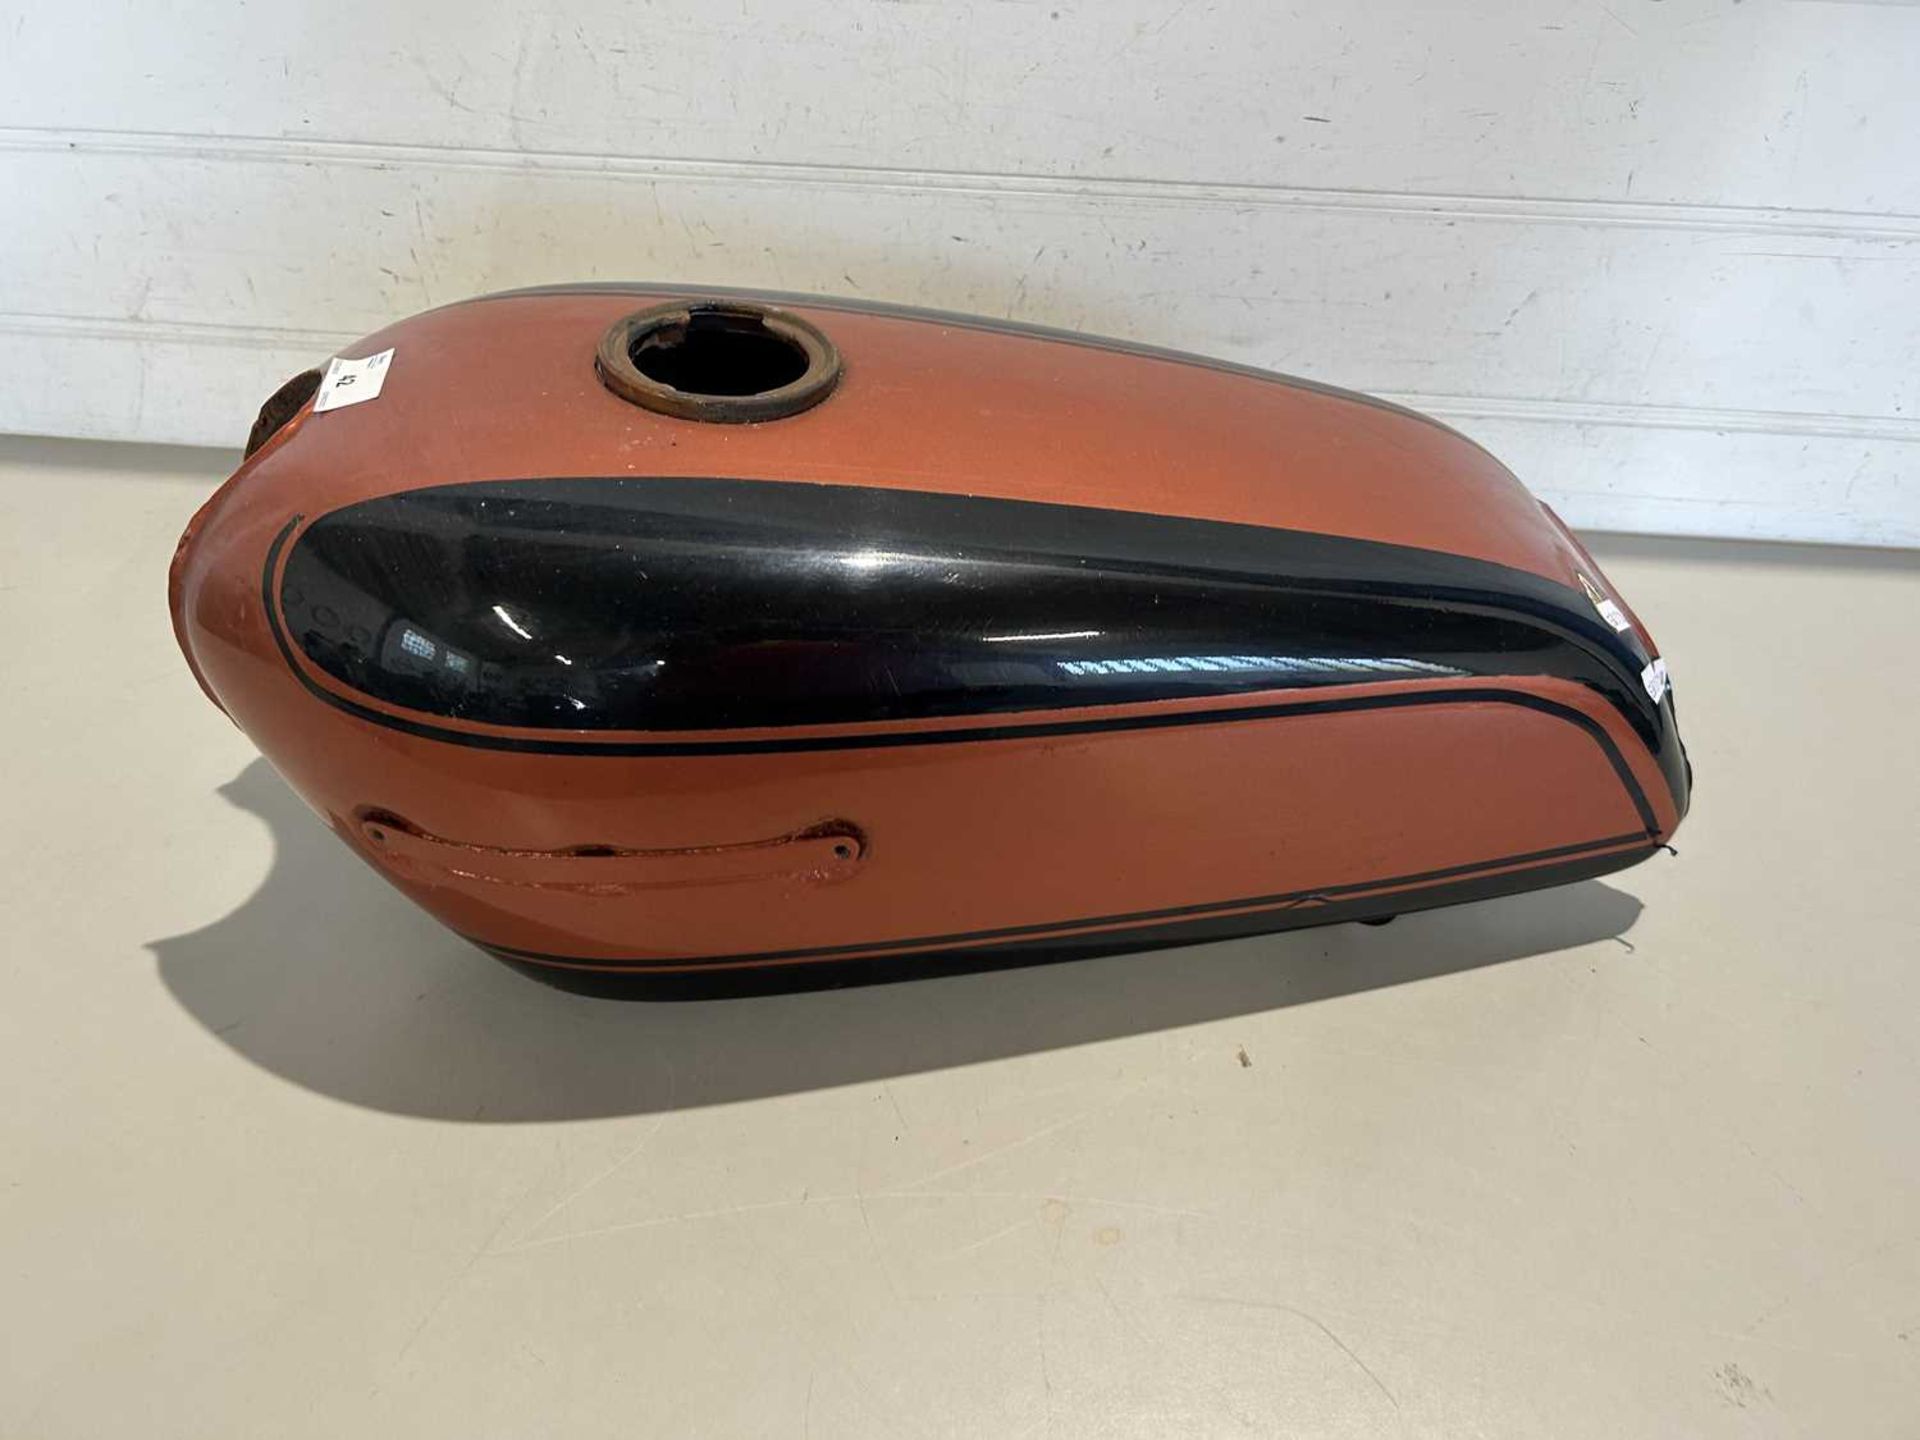 Fuel tank for Yamaha R5 motorcycle, orange and black - Image 3 of 3